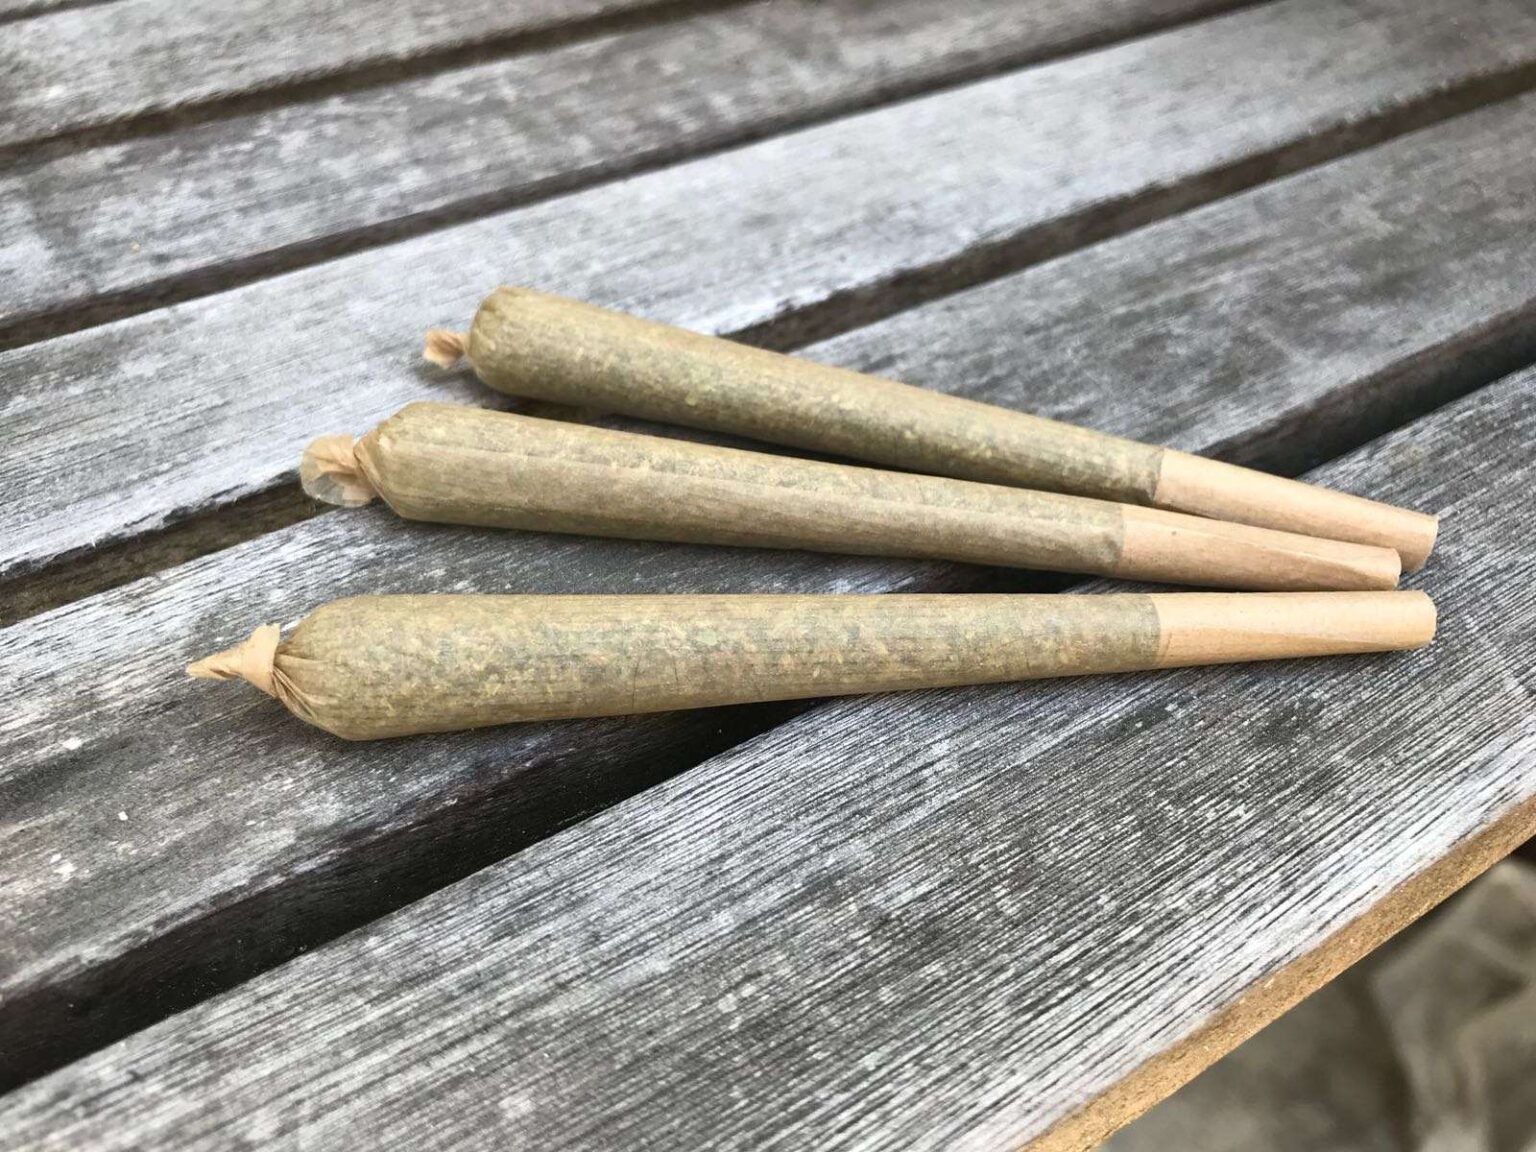 Pre-rolled joints are more popular than ever. Find out why they are in such high demand and what makes them so easy to use.